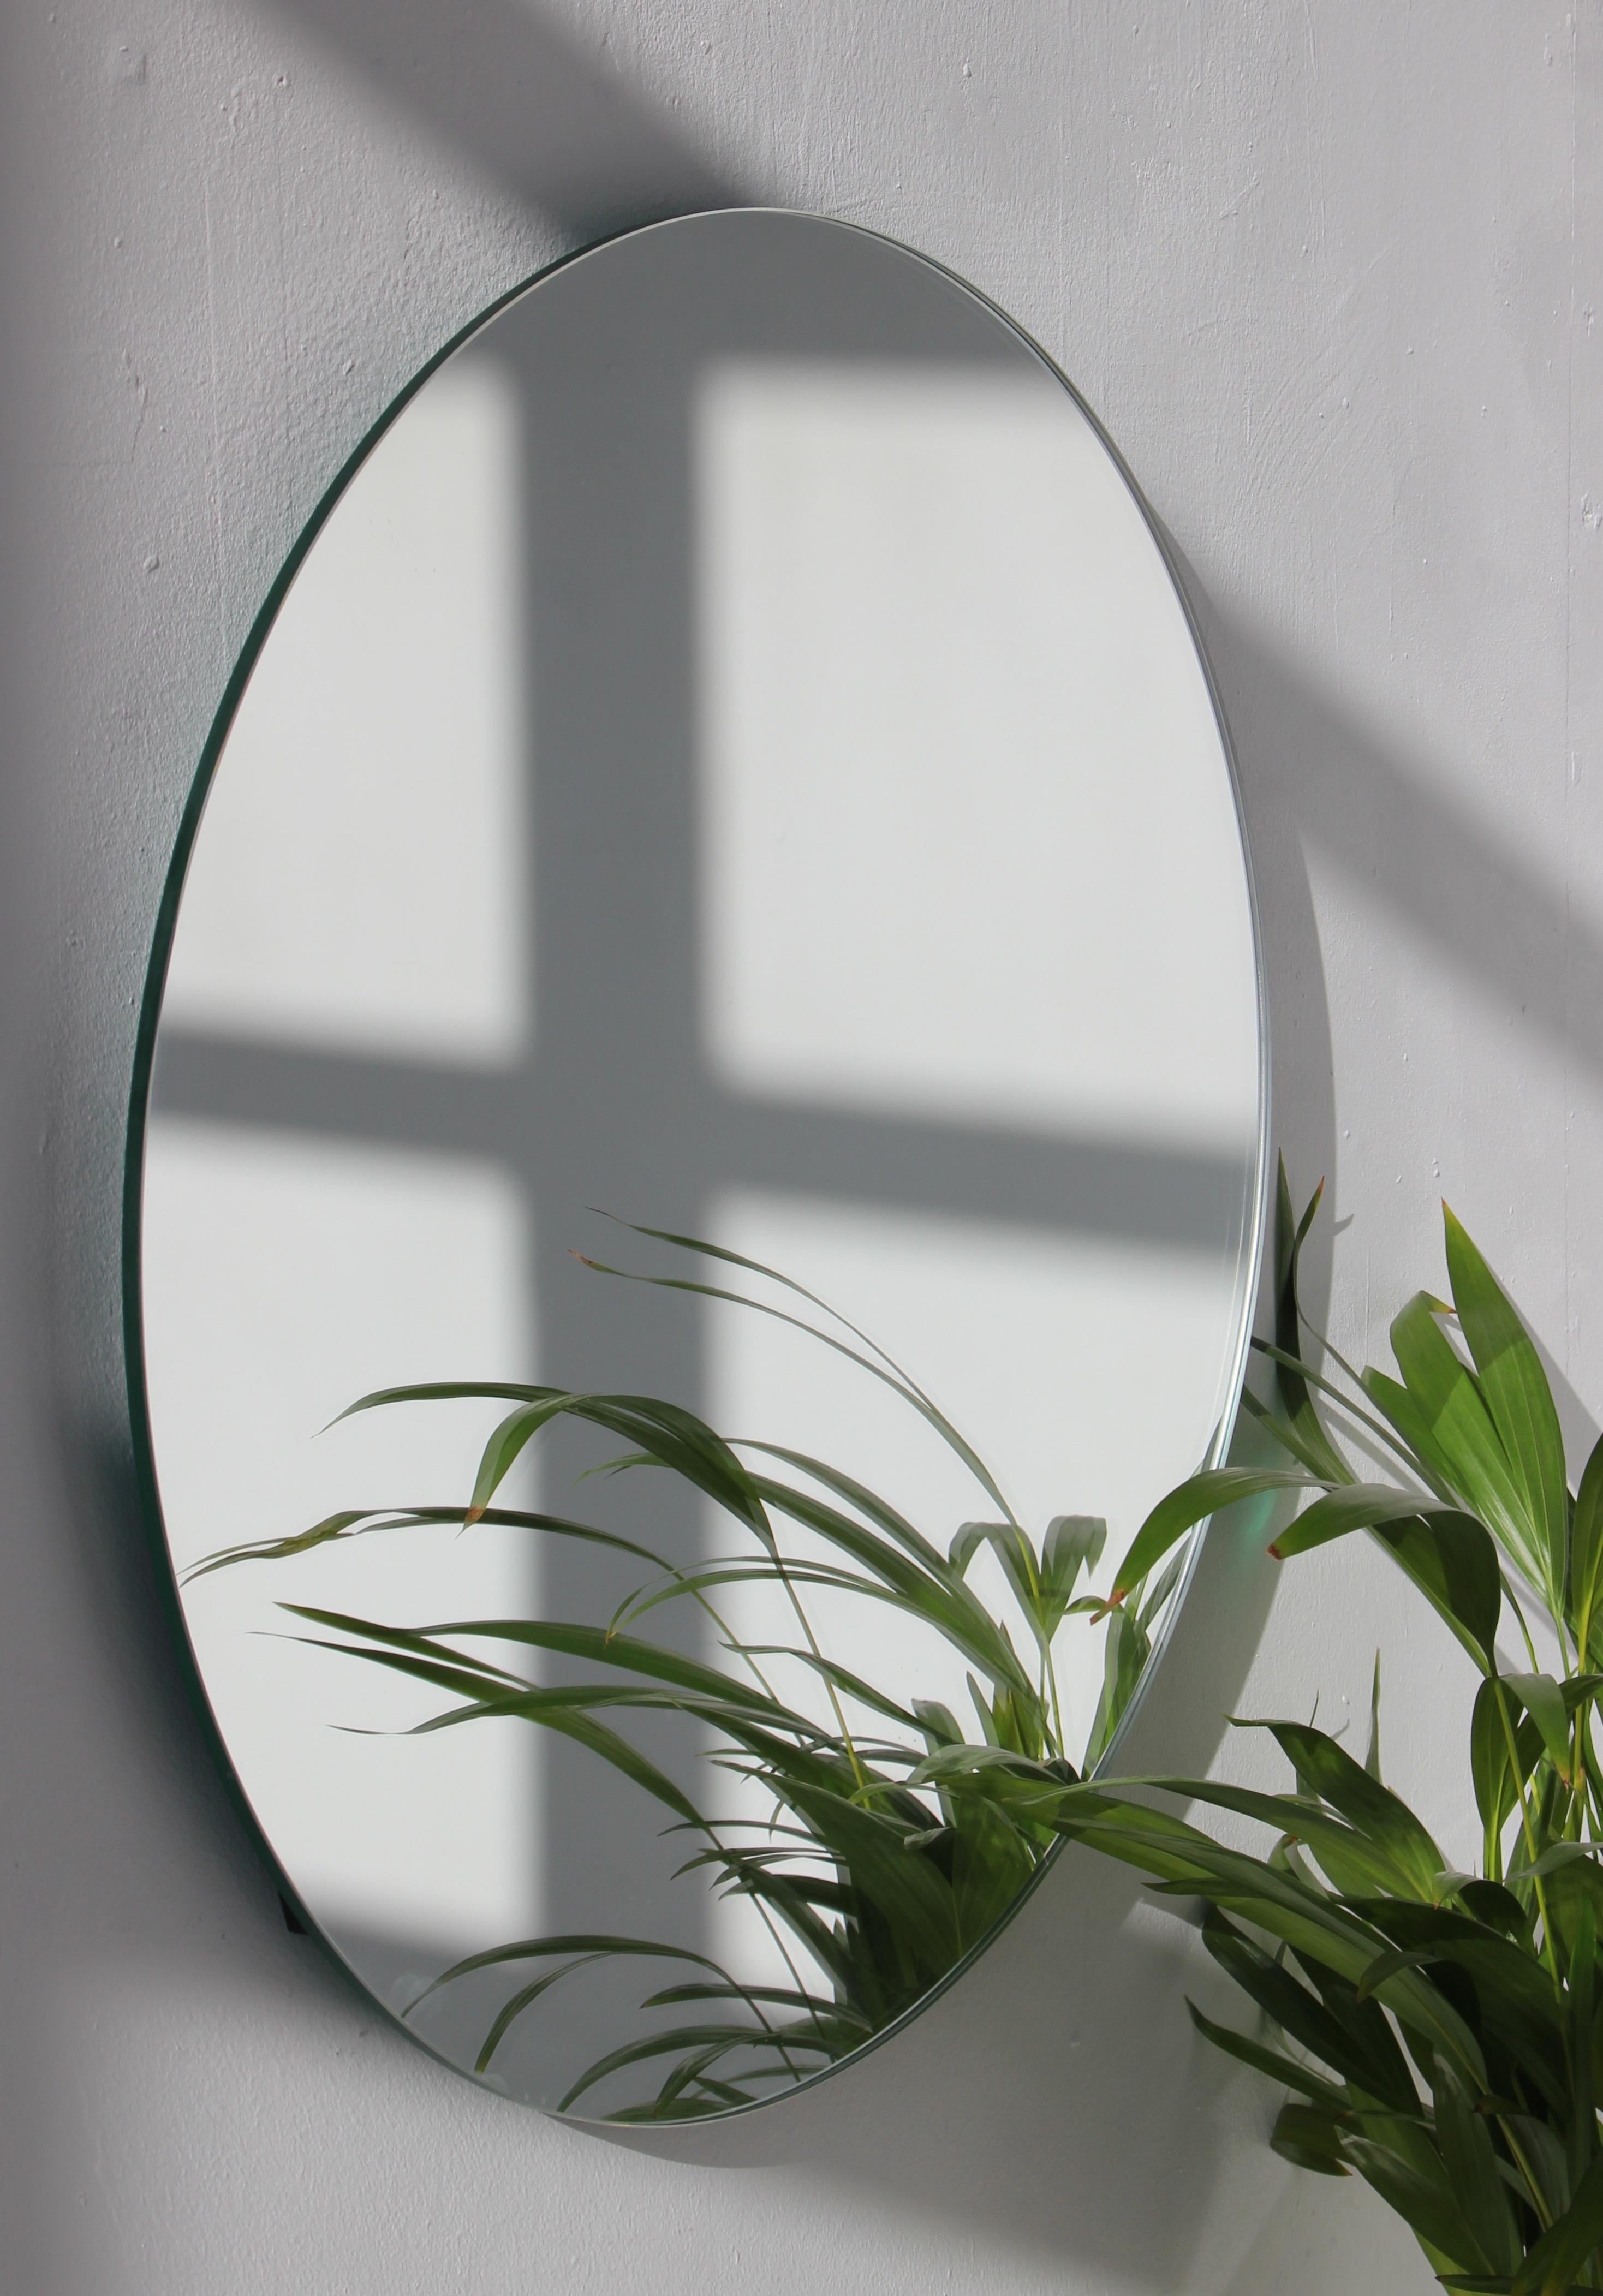 Charming and minimalist round frameless mirror with a floating effect. Quality design that ensures the mirror sits perfectly parallel to the wall. Designed and made in London, UK.

Fitted with professional plates not visible once installed for an